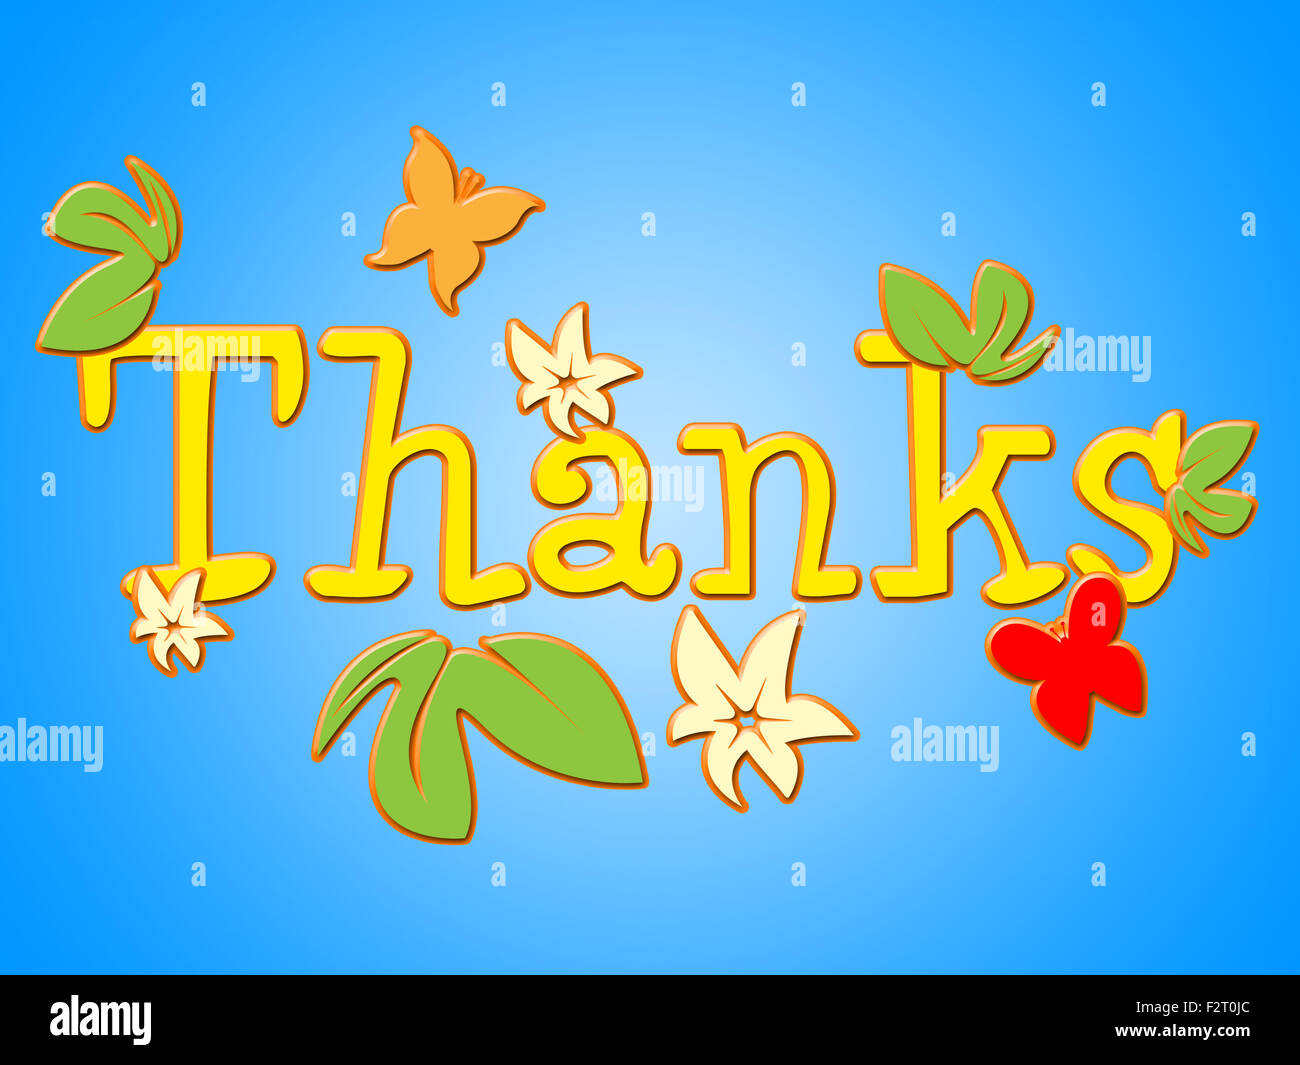 Thanks Flowers Representing Florals Bouquet And Petal Stock Photo